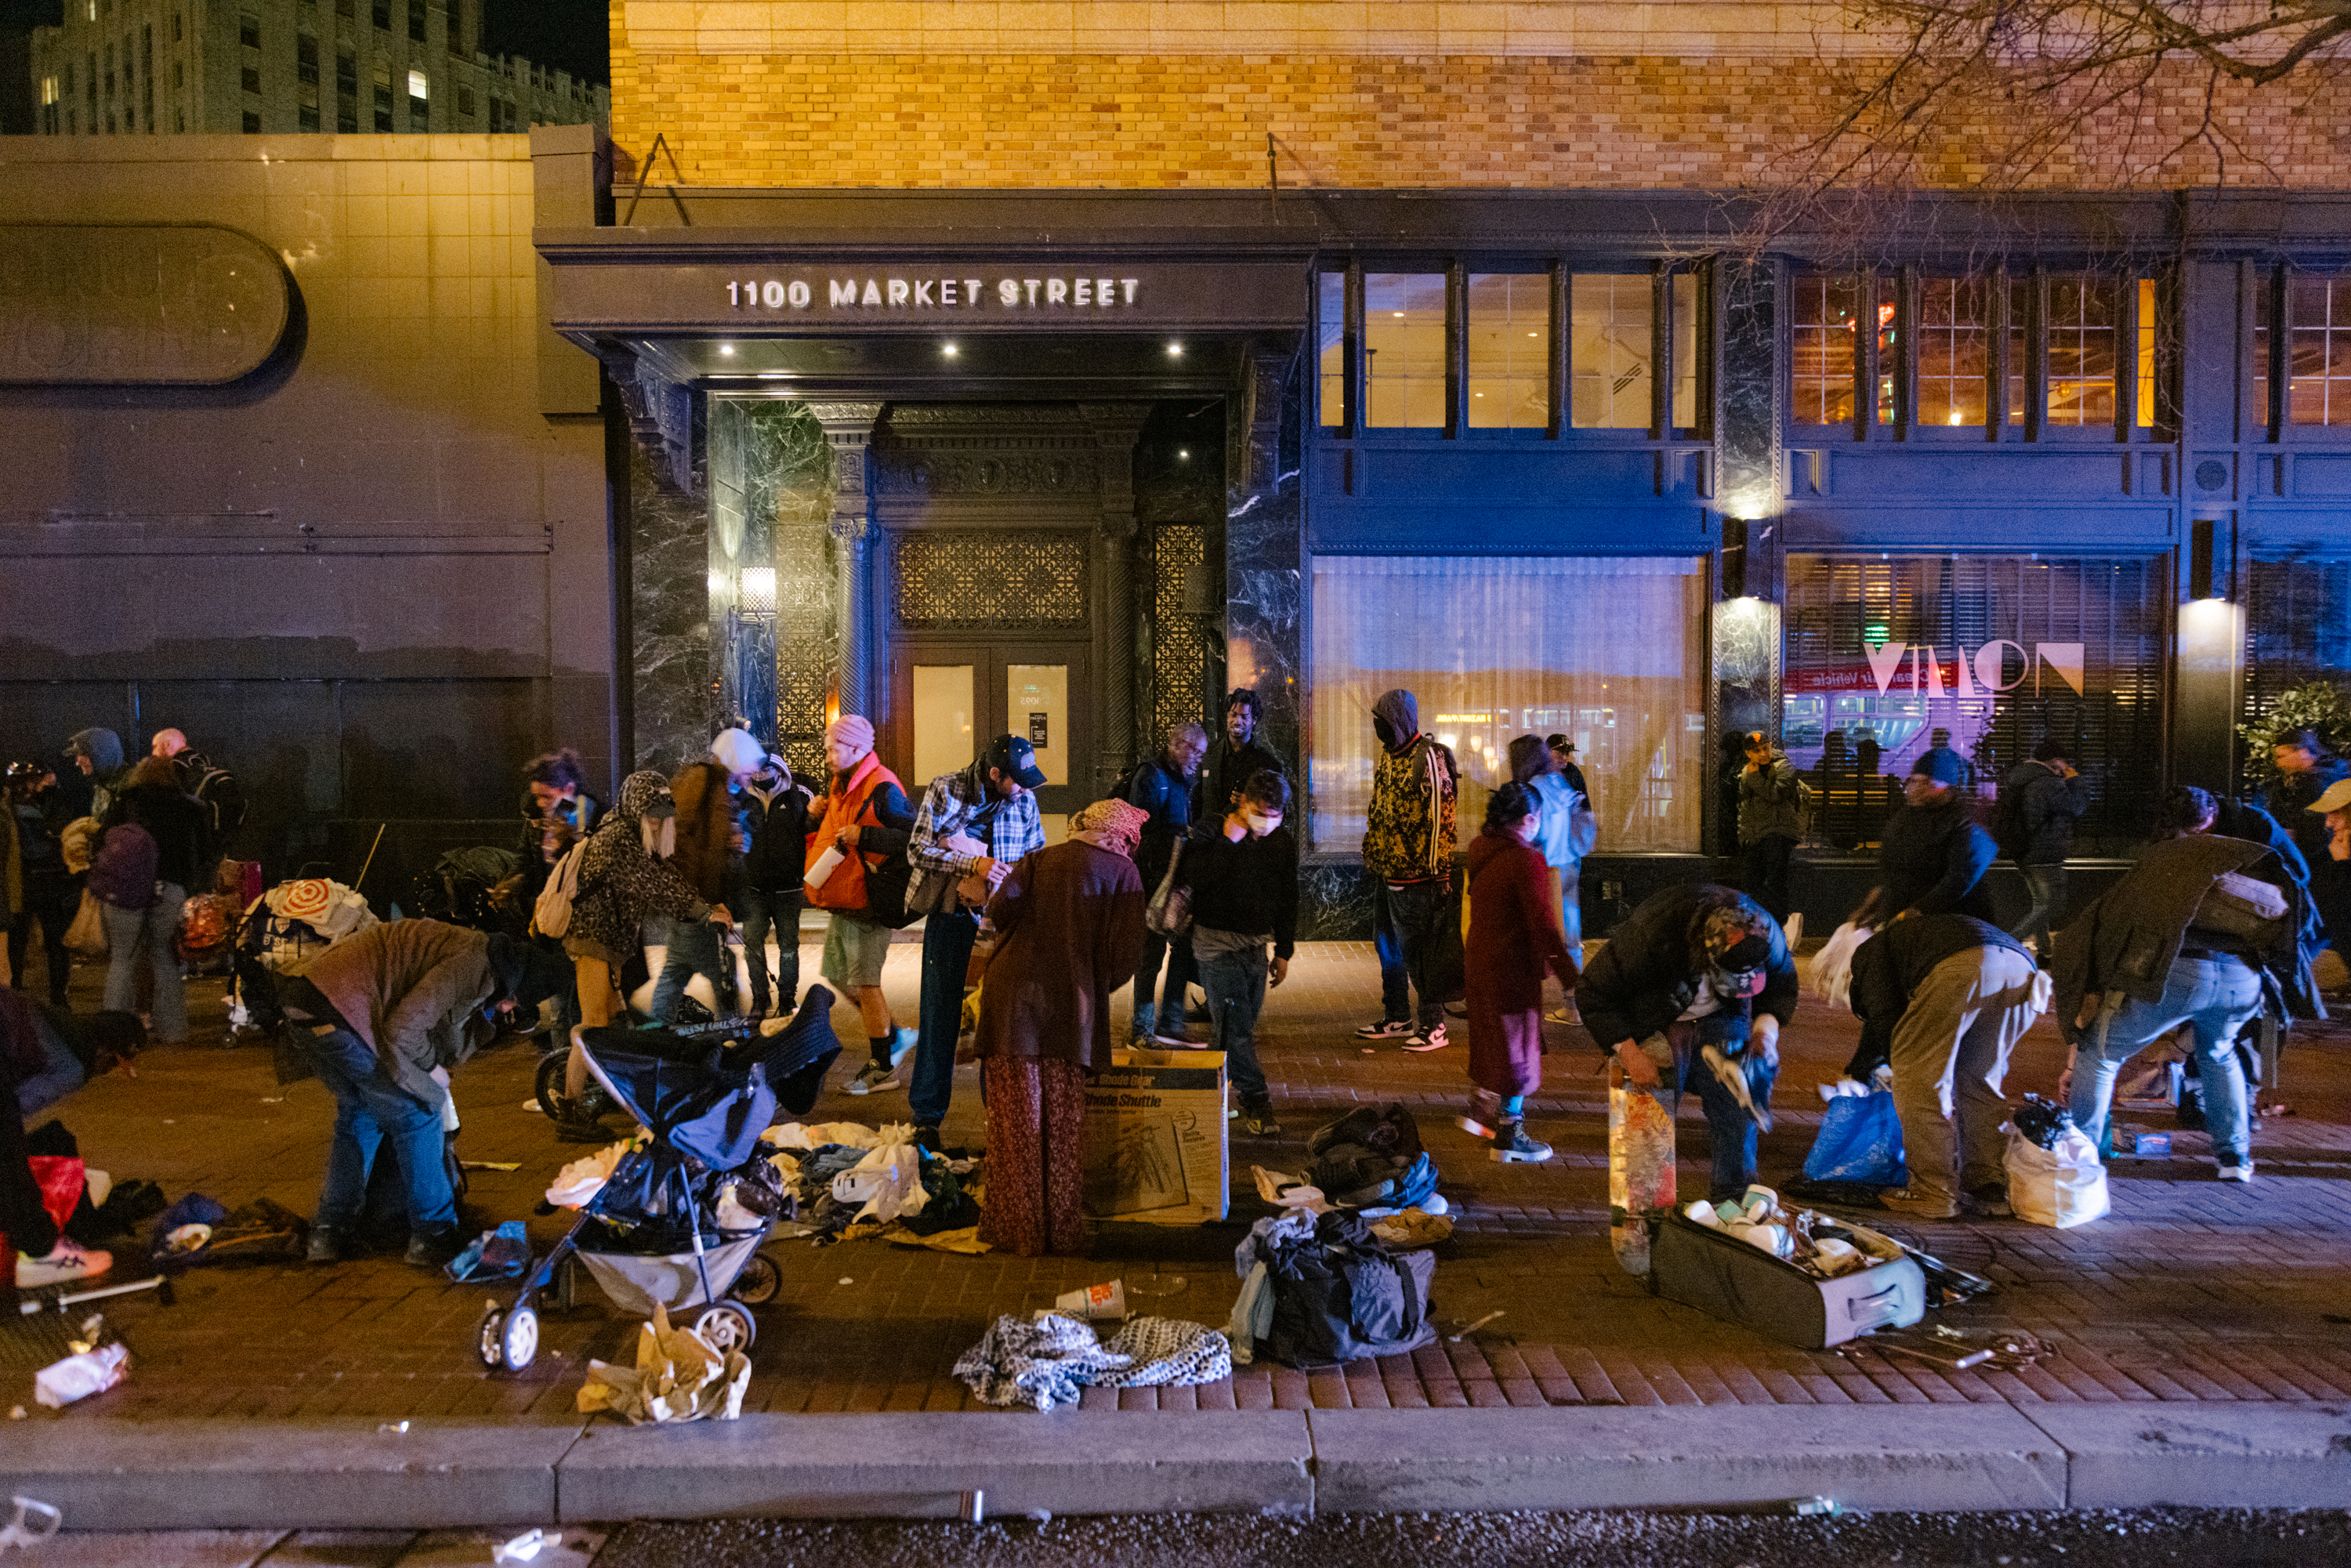 People rummaging through scattered items on a sidewalk at night, in front of a building labeled &quot;1100 Market Street.&quot;